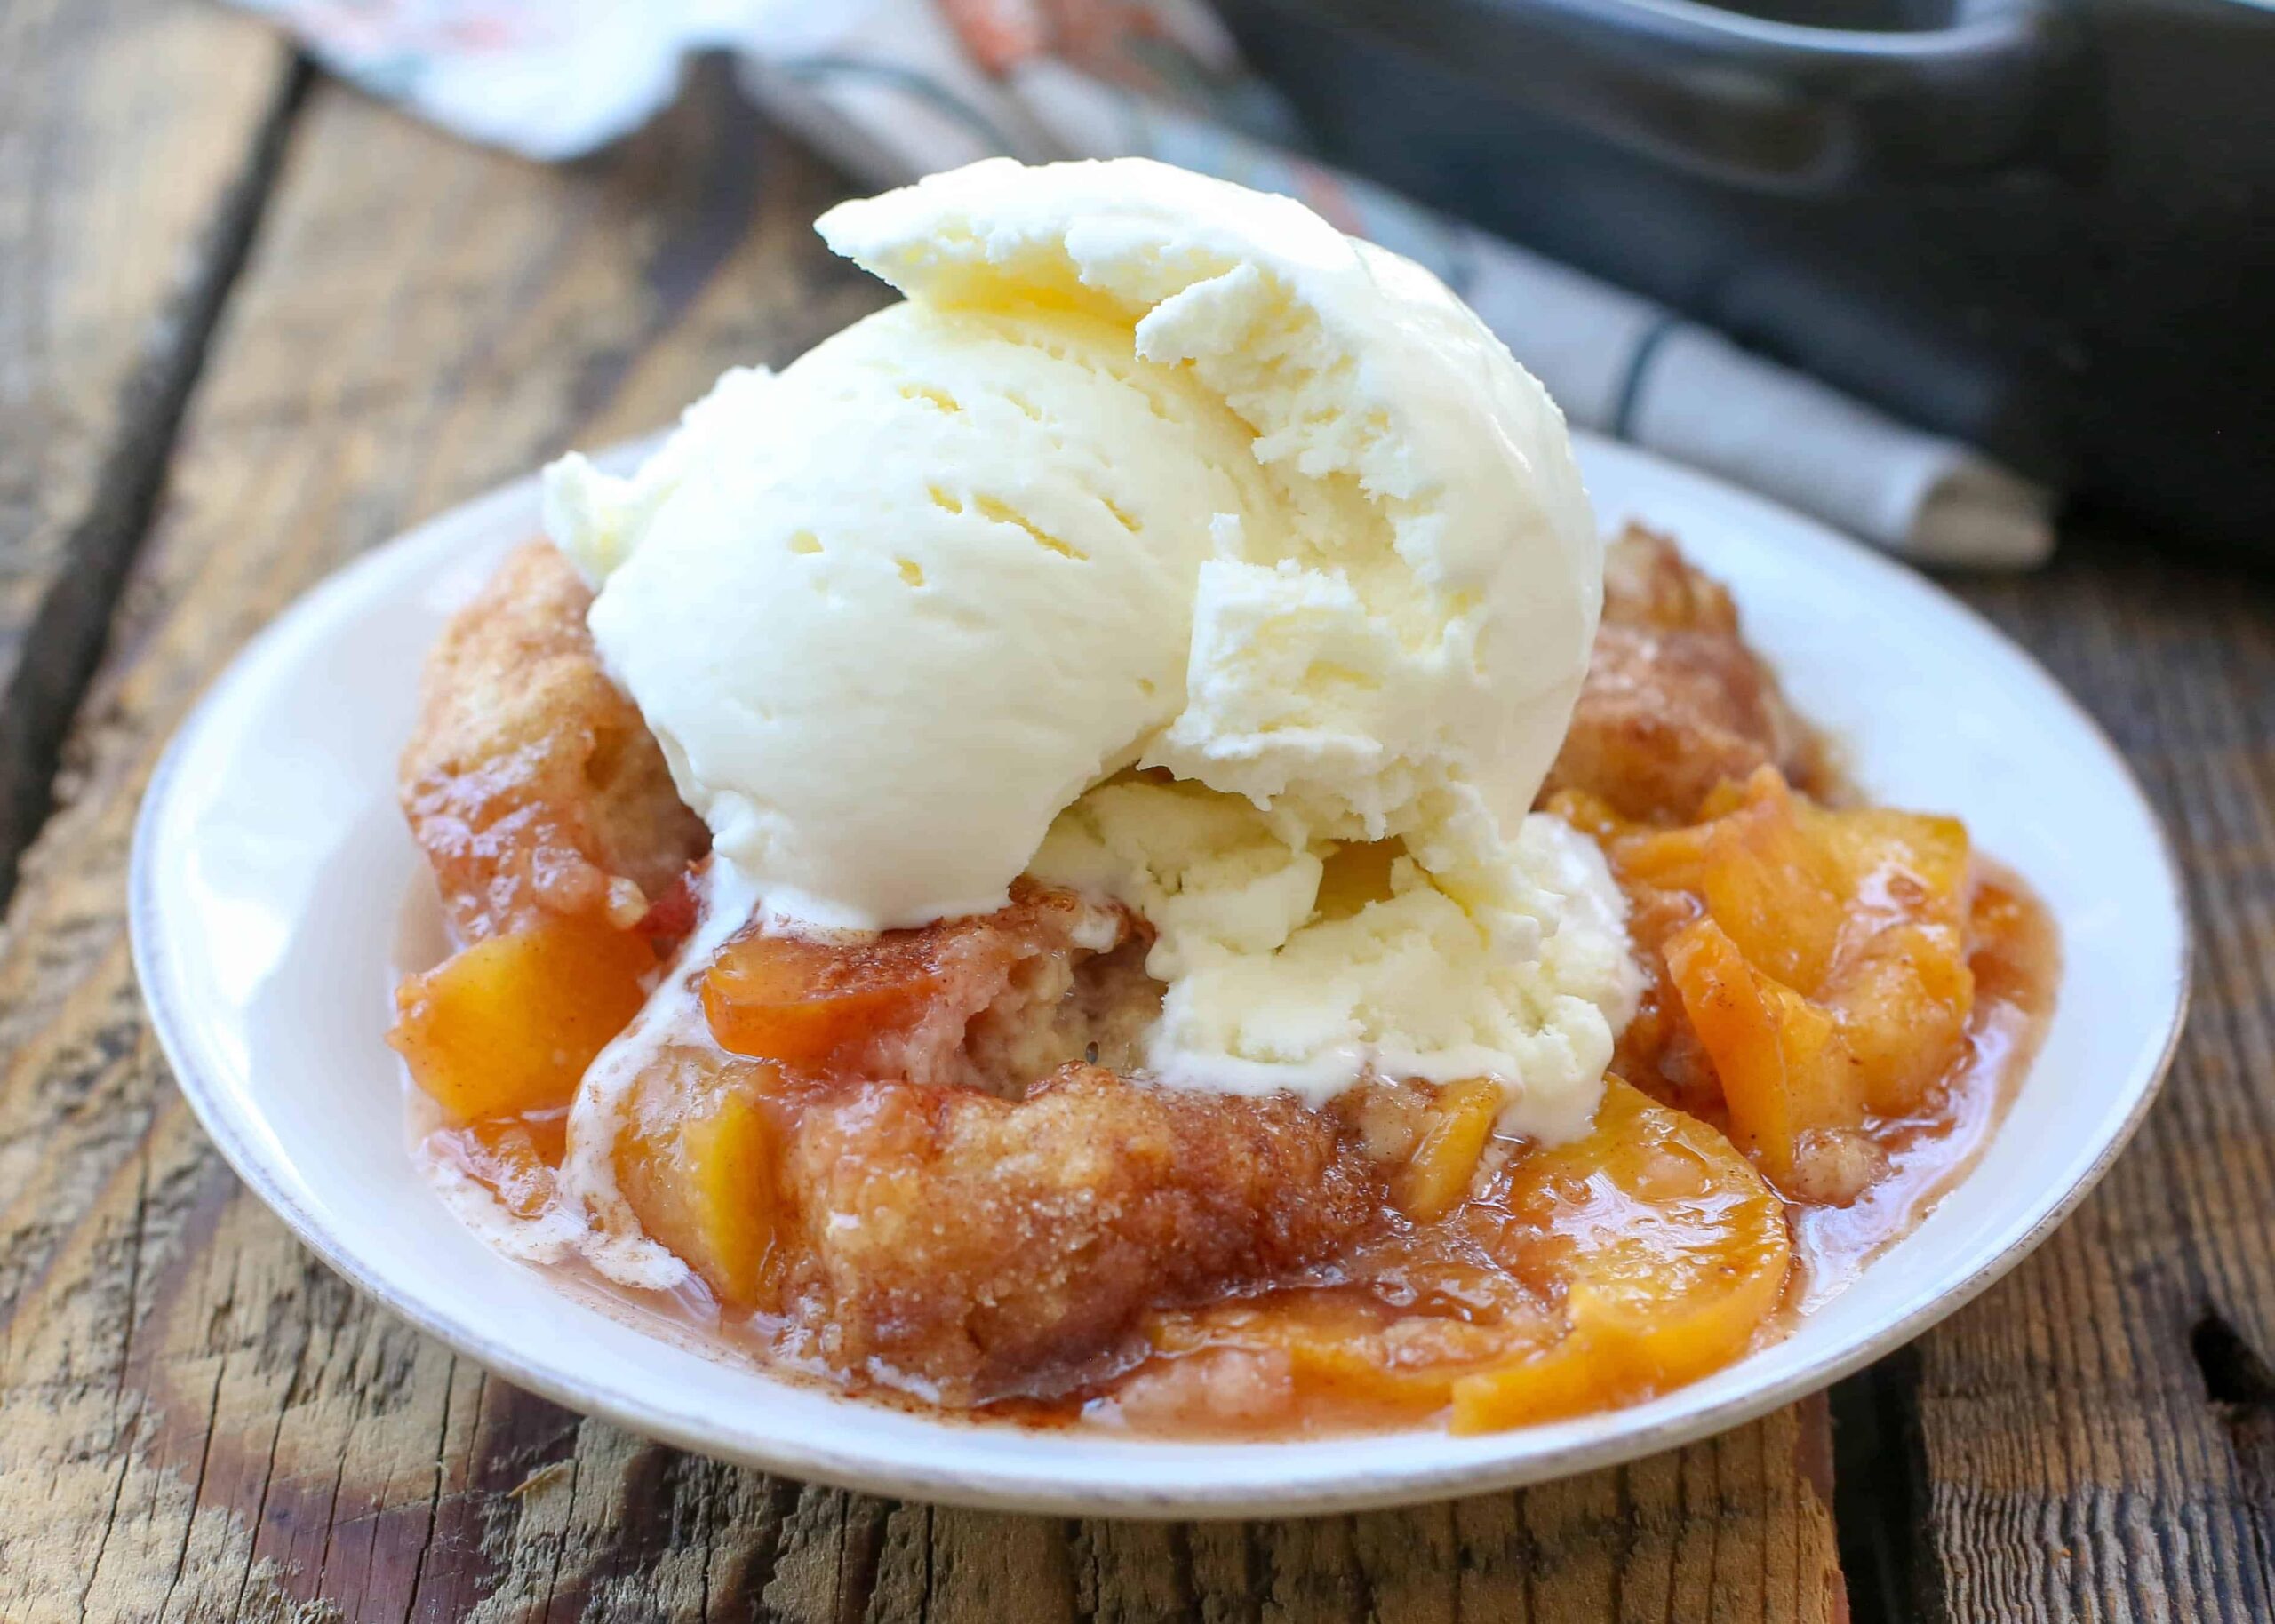  A scoop of vanilla ice cream takes this cobbler to another level.